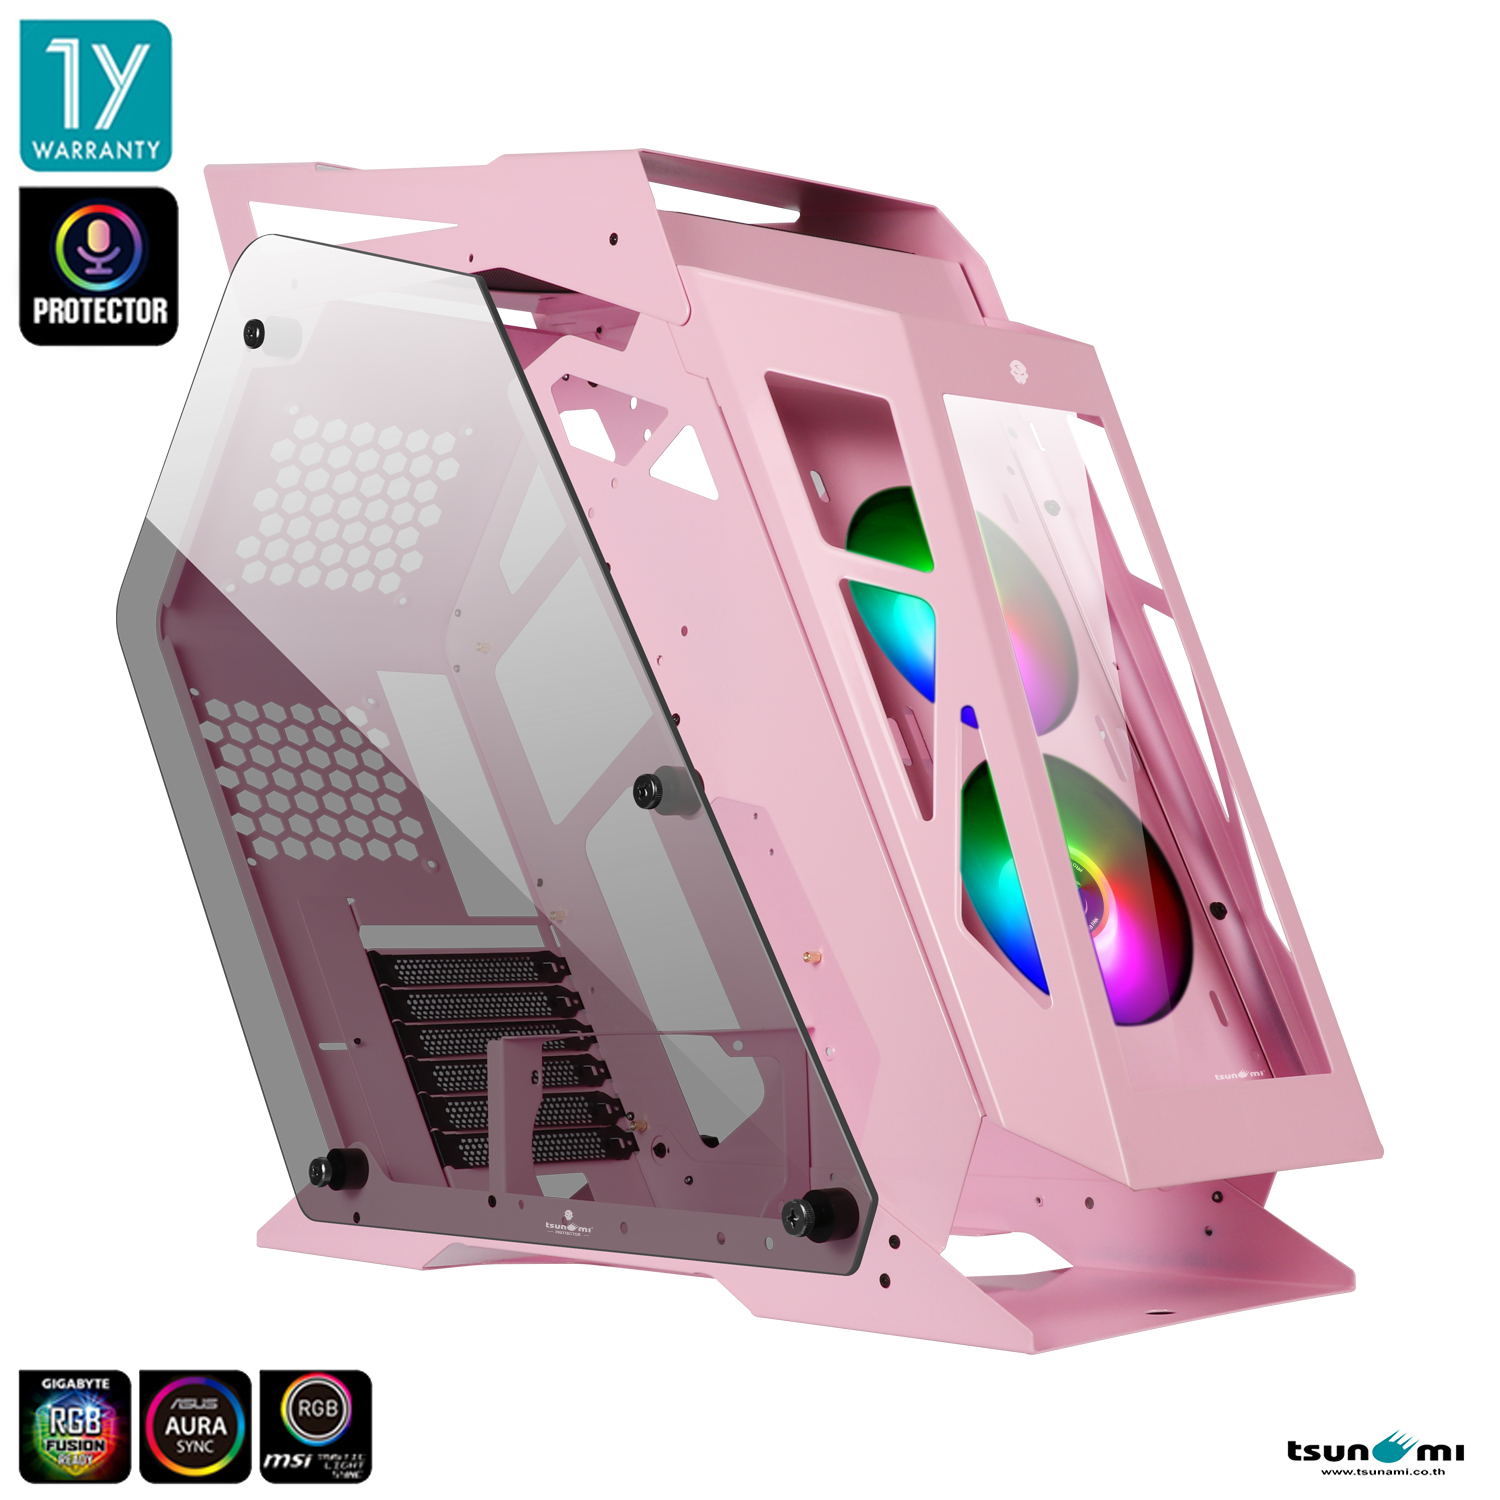 Tsunami Protector Goliath (Protector Sound Sync) Tempered Glass ATX Mutant Gaming Computer Case with Ablaze+ (Aura）*2